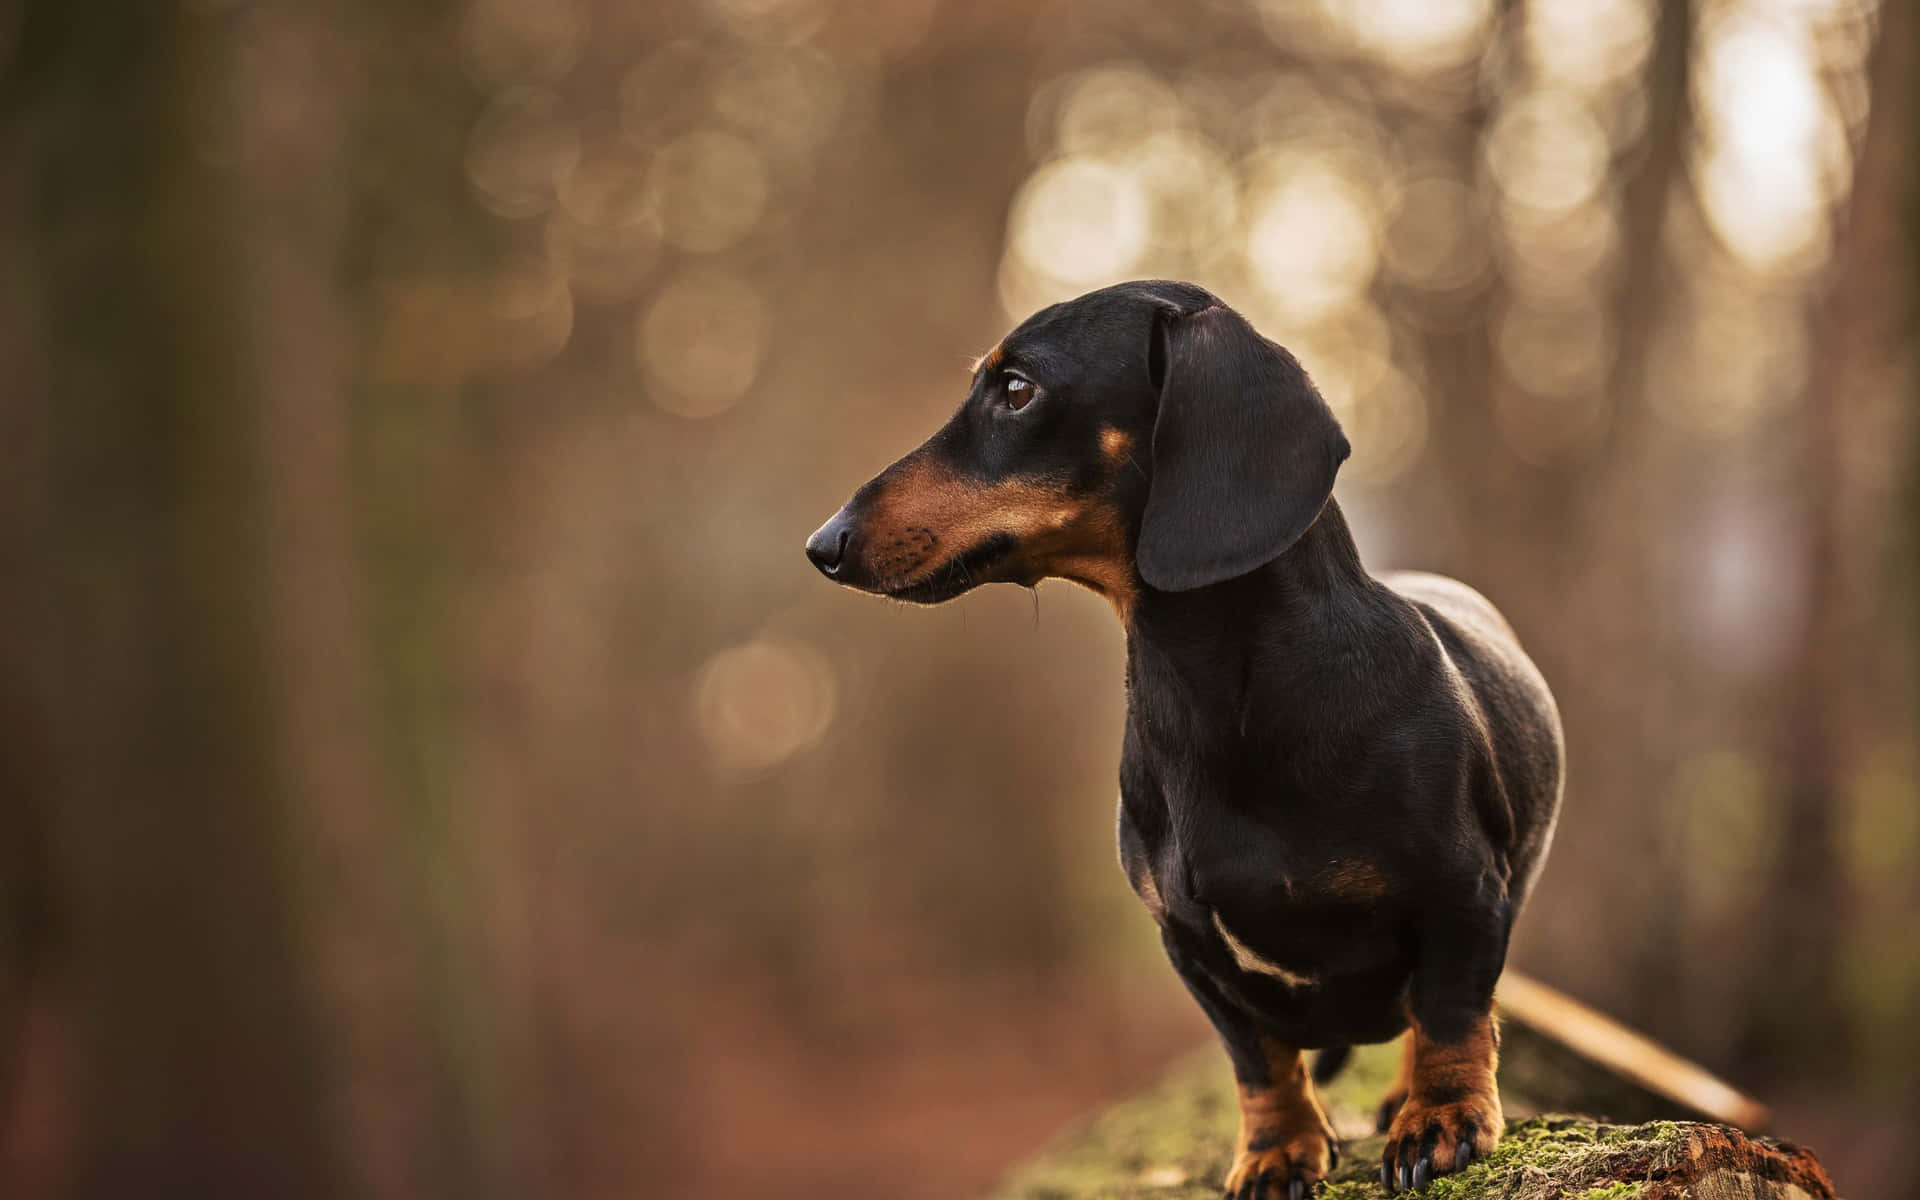 A Dachshund Playfully Exploring His Surroundings